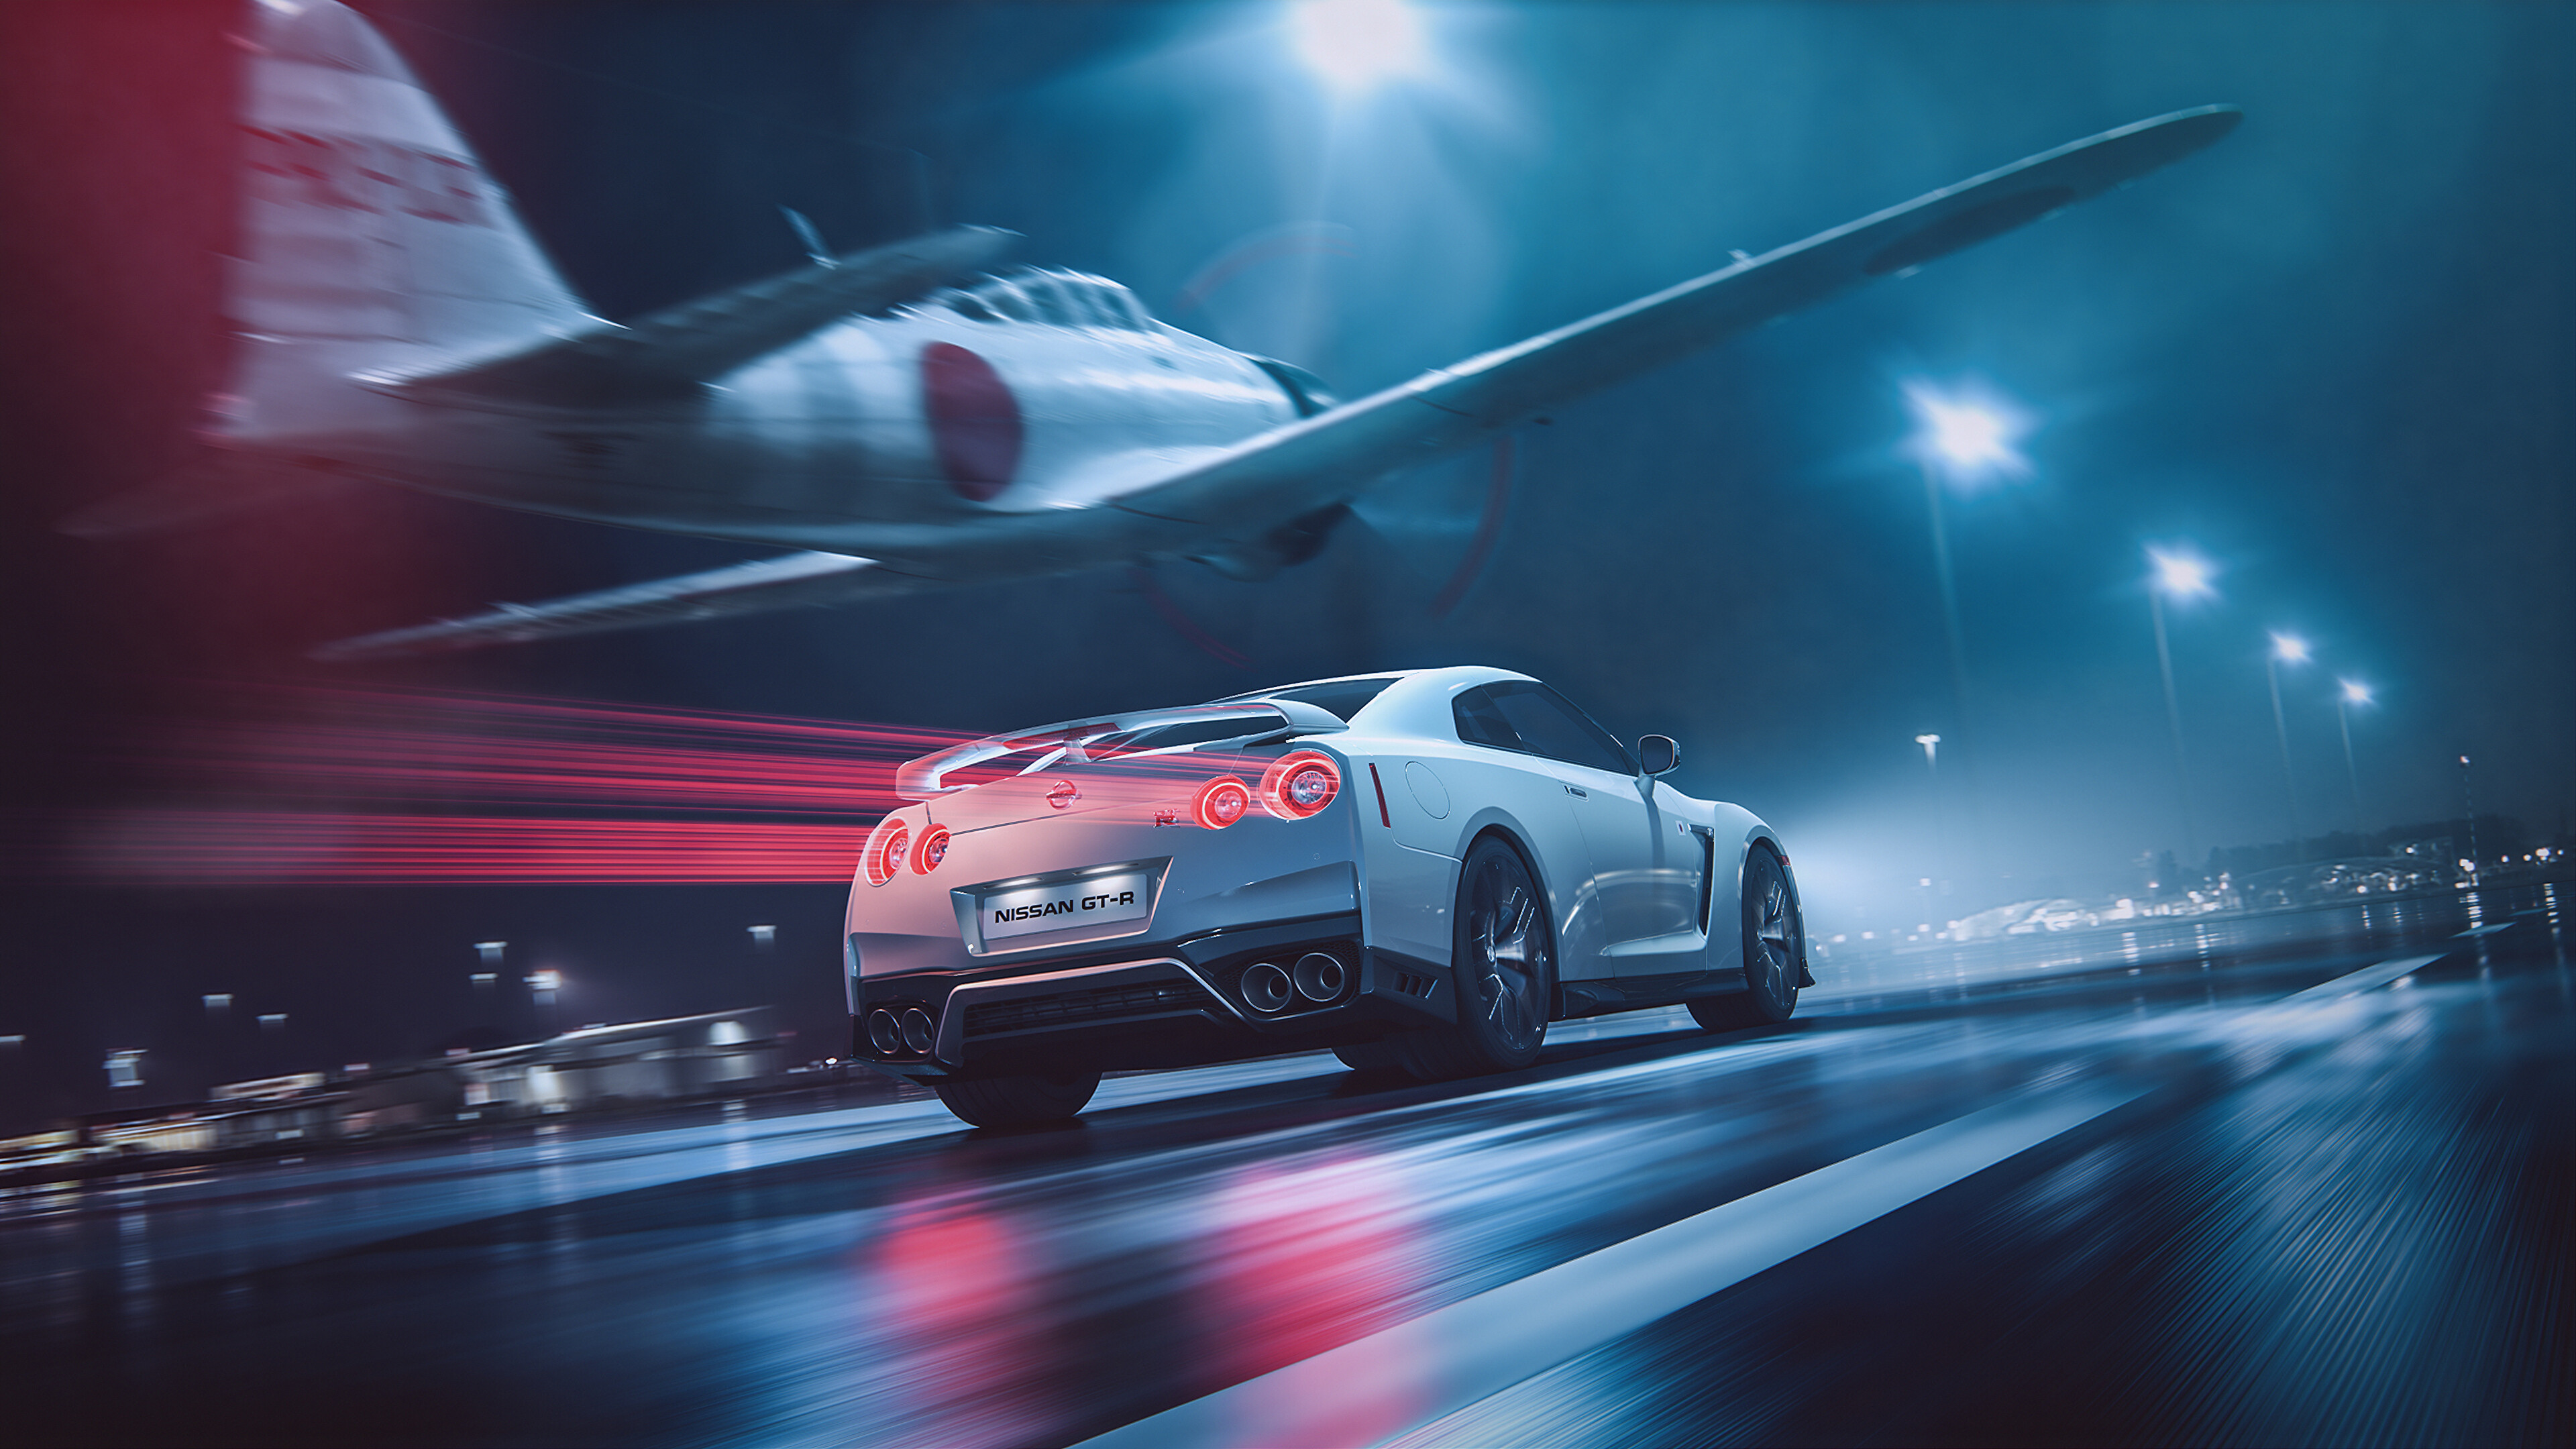 Nissan: GT-R, A high-performance sports car and grand tourer unveiled in 2007. 3840x2160 4K Wallpaper.